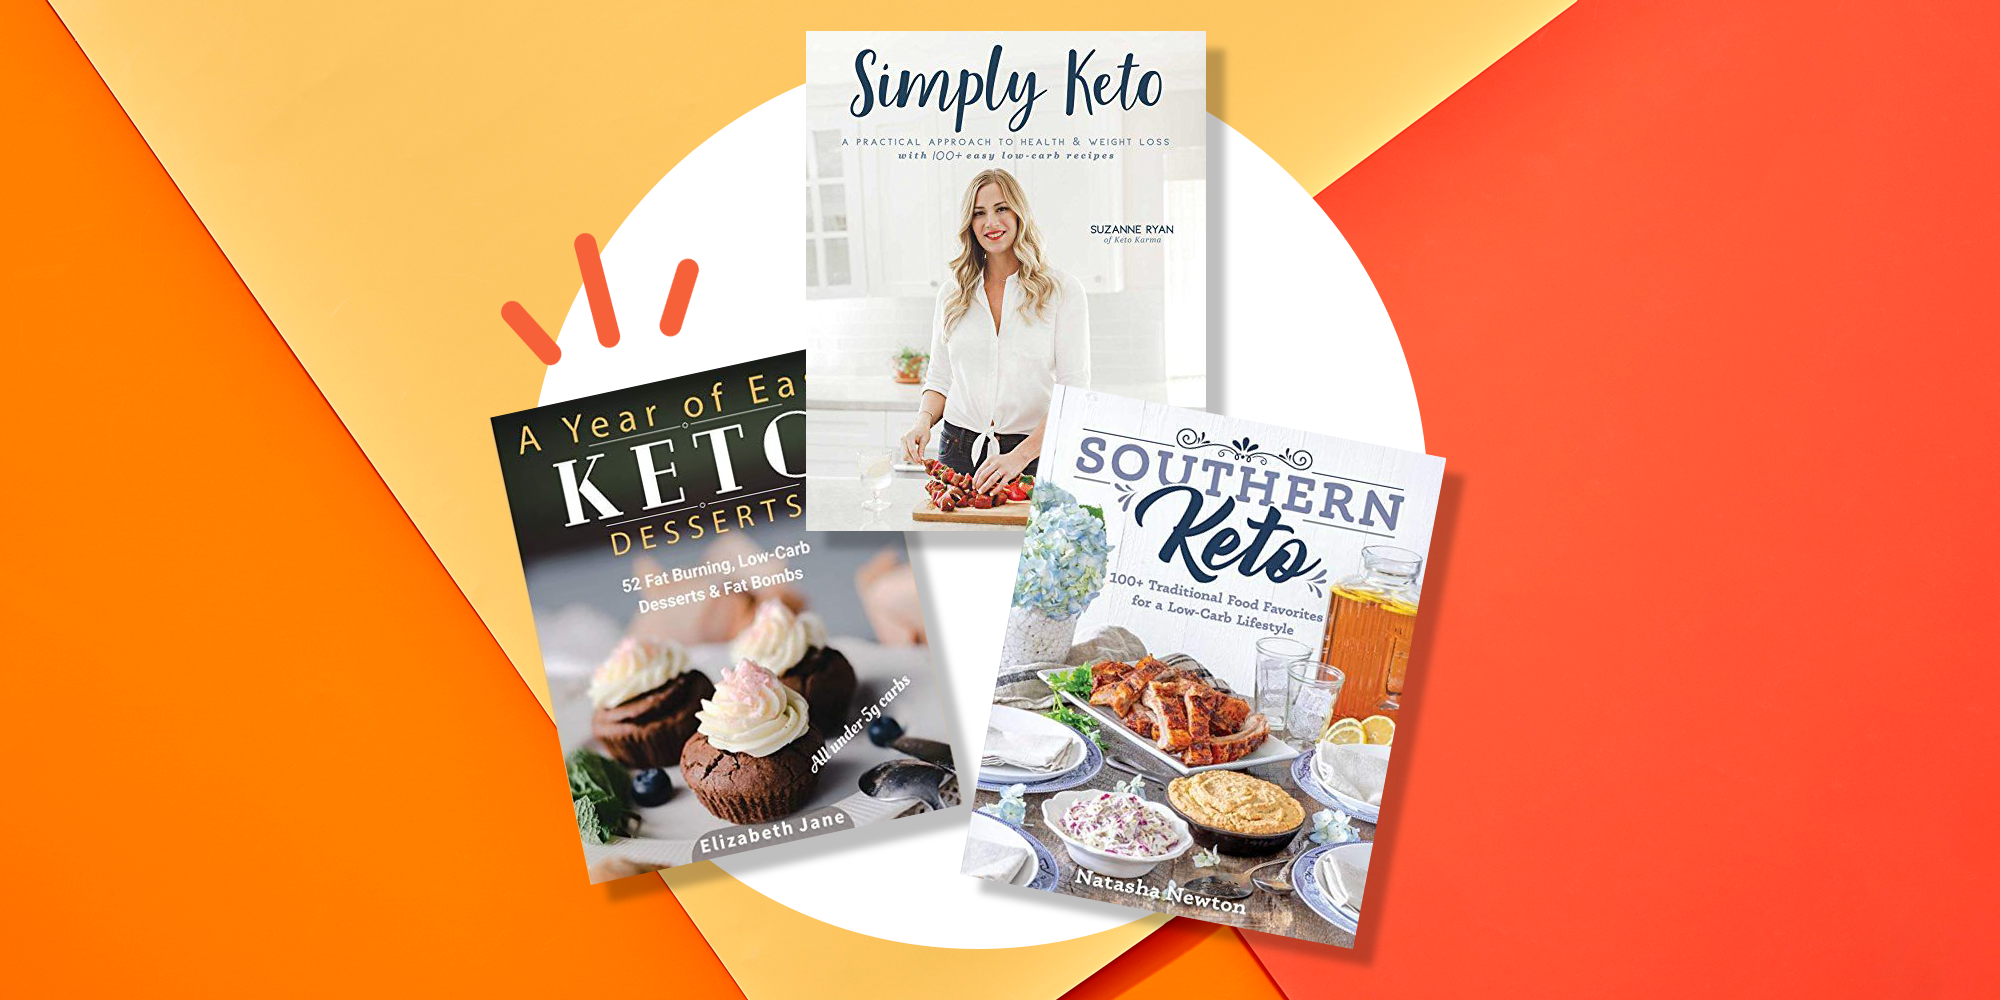 The Recipes In One Of These Keto Cookbooks Have Only Five Ingredients